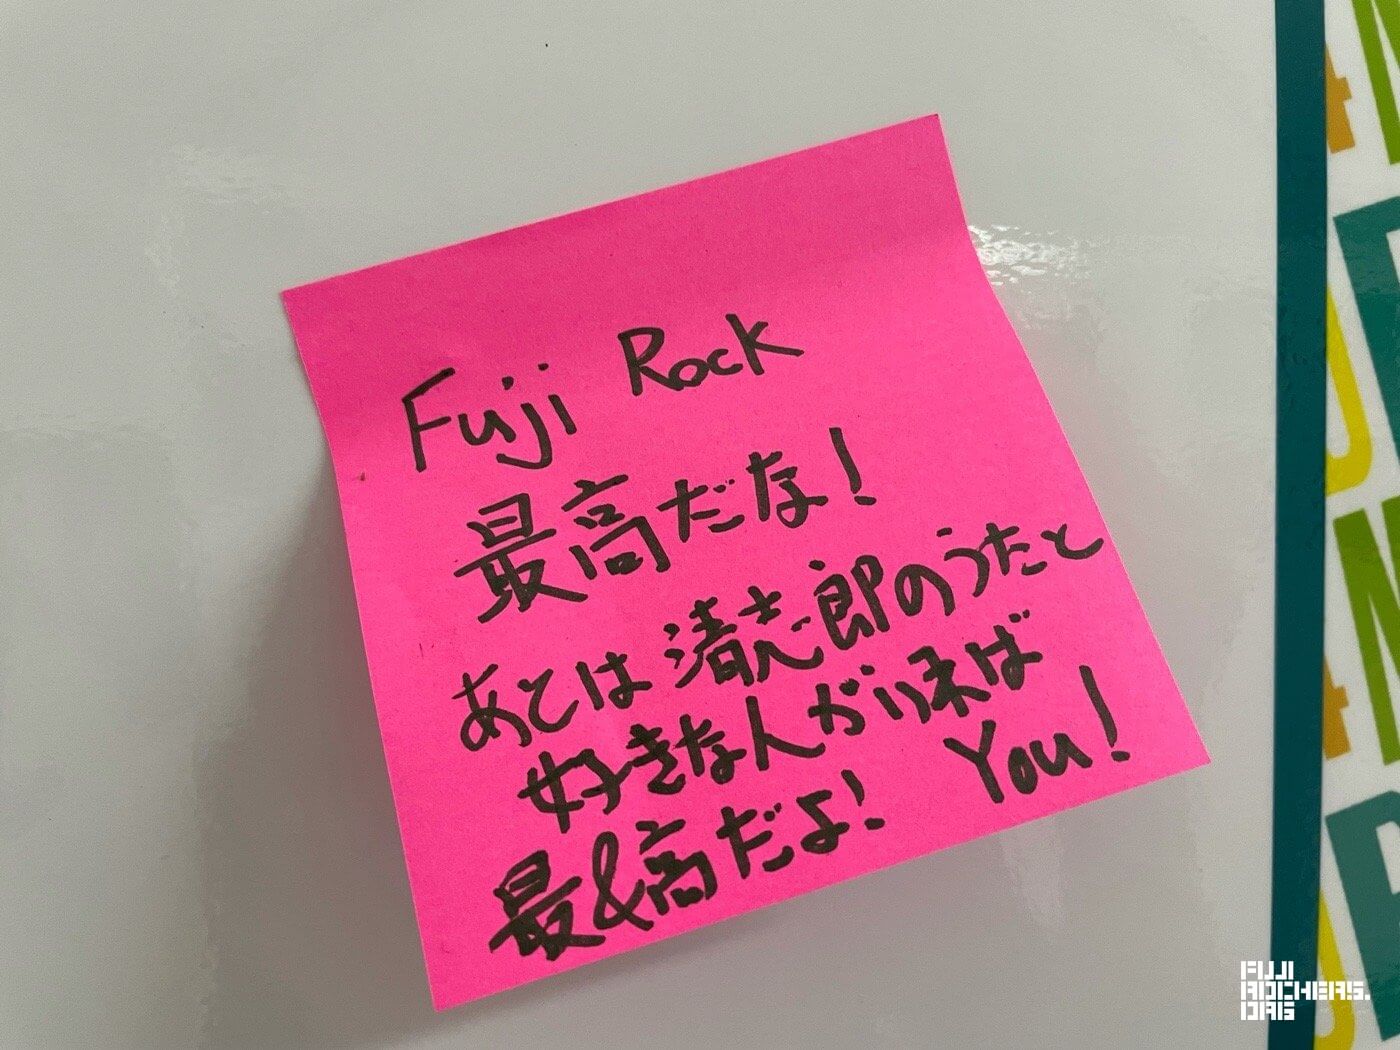 Message for FUJI ROCK #08